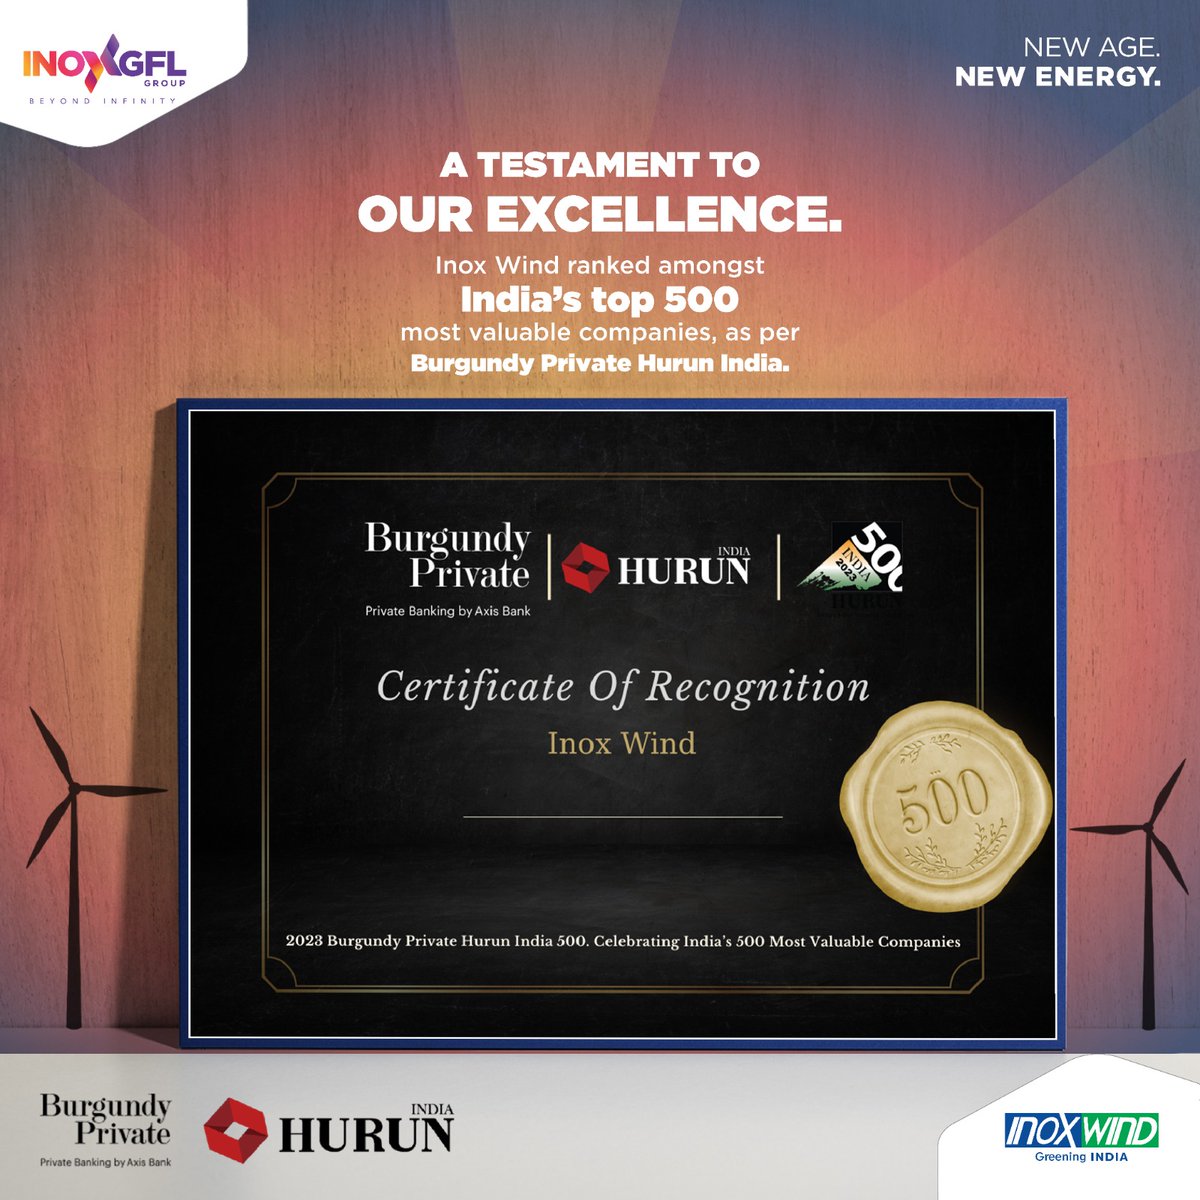 Thrilled to announce that Inox Wind has been recognized in the 2023 Burgundy Private @HurunReportInd 500, reflecting our #commitment to excellence. Thanking our valued team, clients, and partners!
Read more: hurunindia.com
@AxisBank
#HurunIndia500 #HurunIndia